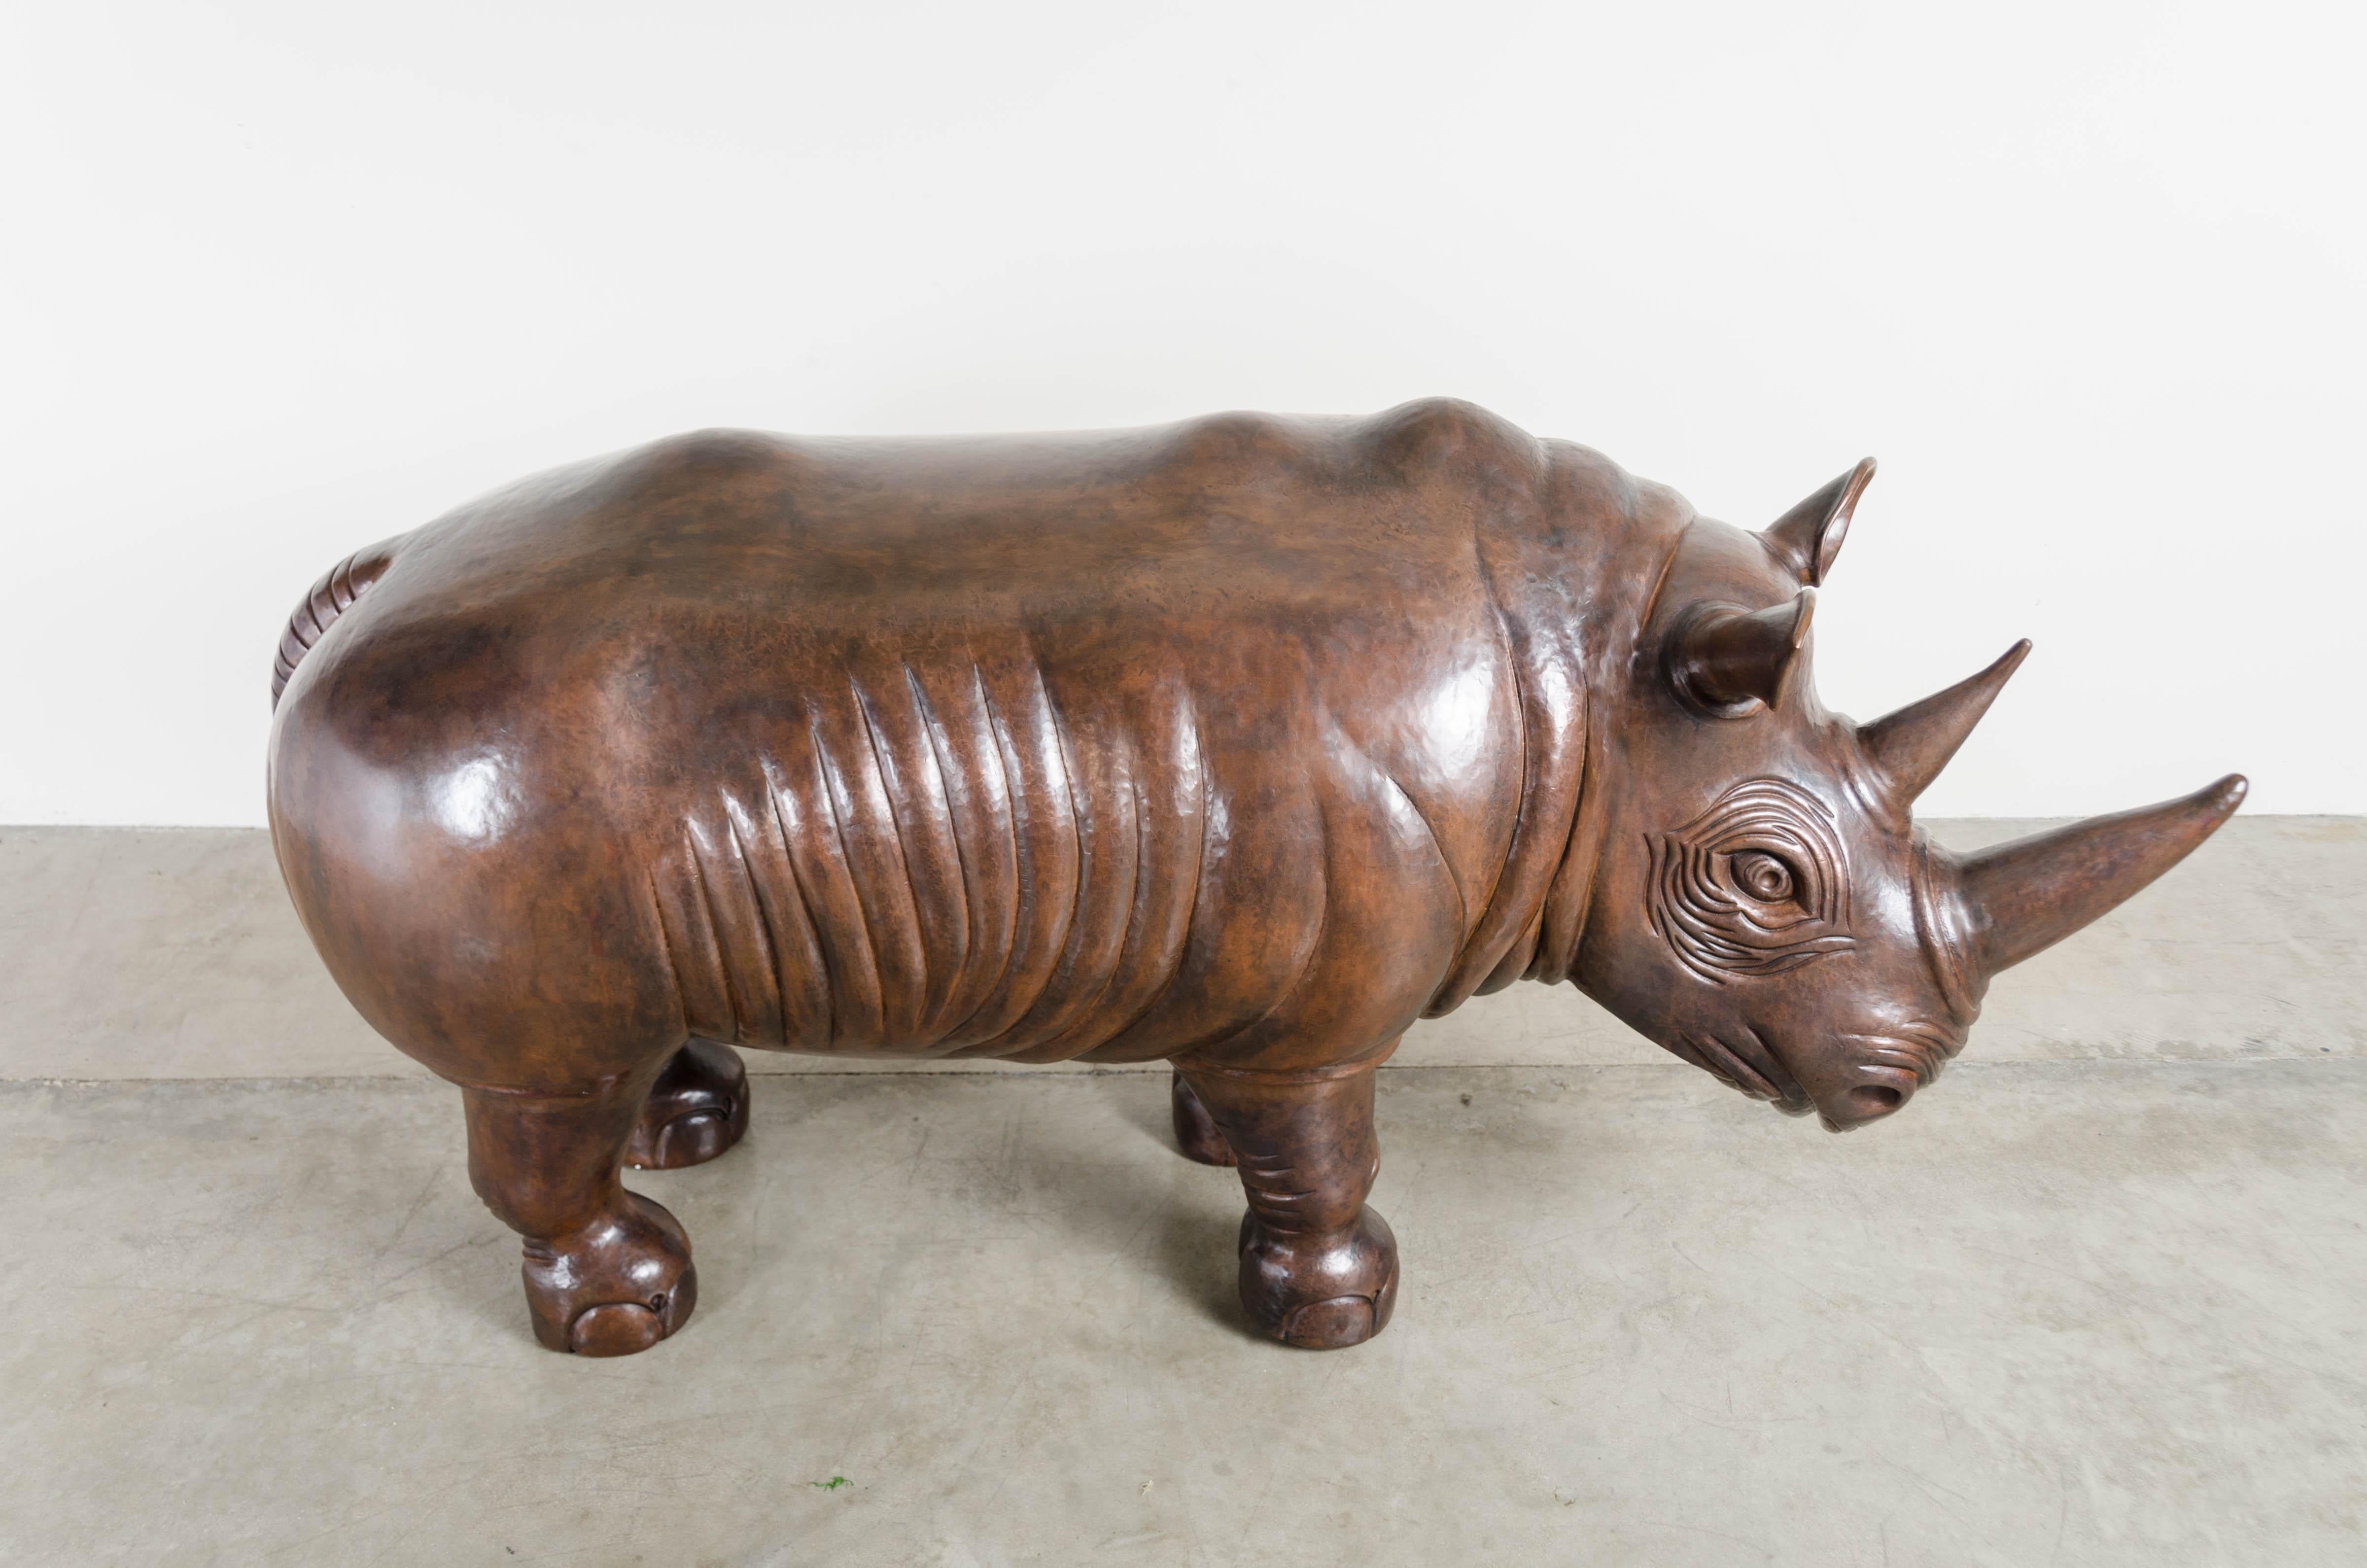 Contemporary Rhinoceros Sculpture, Antique Copper by Robert Kuo, One of a Kind For Sale